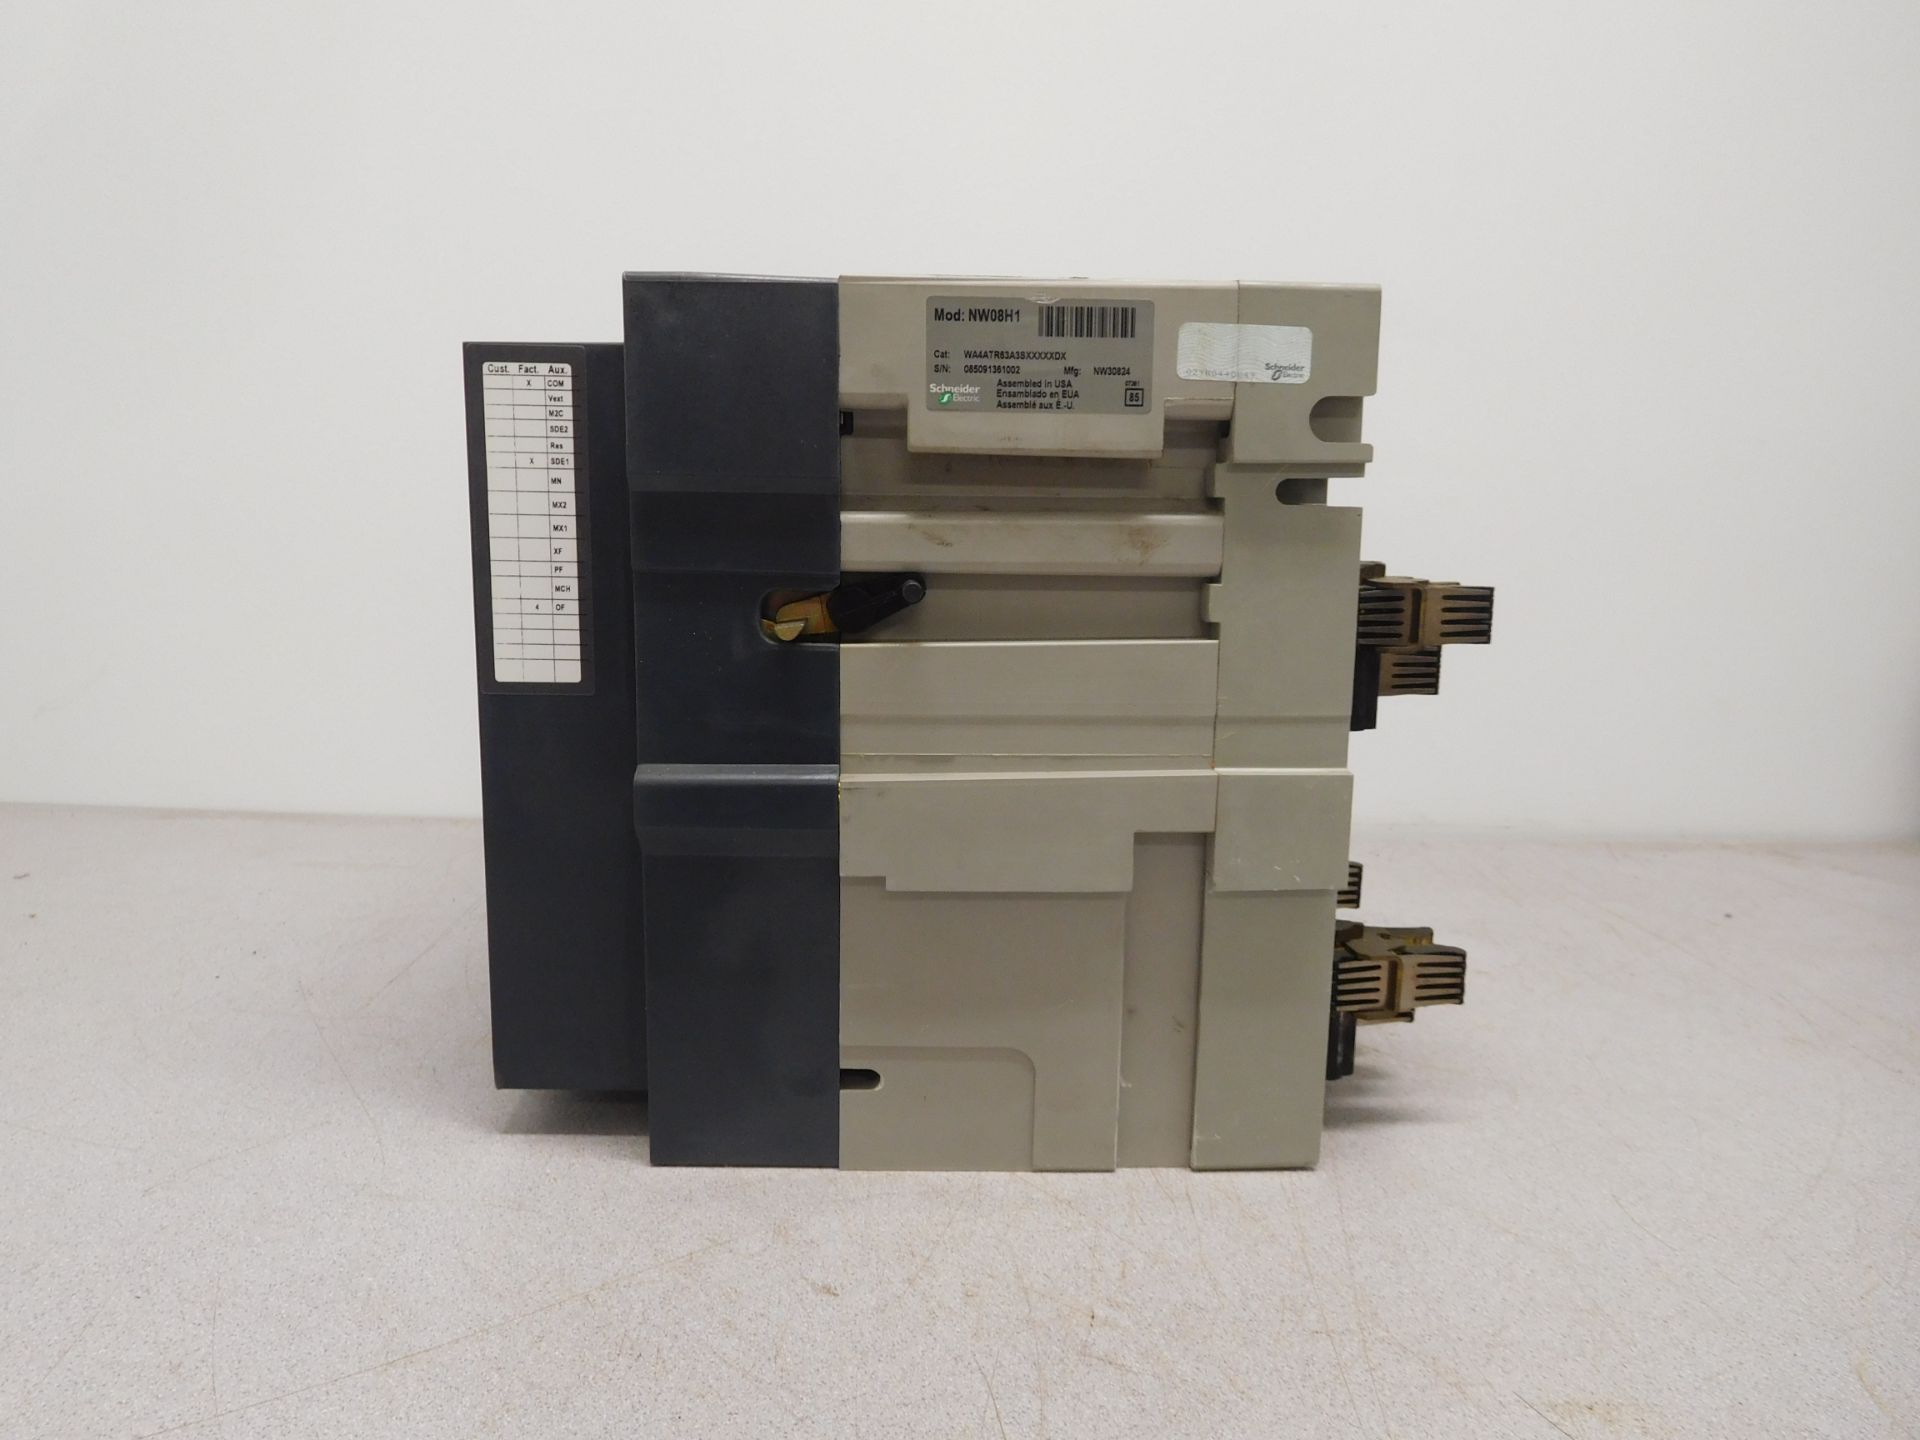 Square D NW 08 H1 Masterpact 800 Amp Low-Voltage Power Circuit Breaker - Image 5 of 7